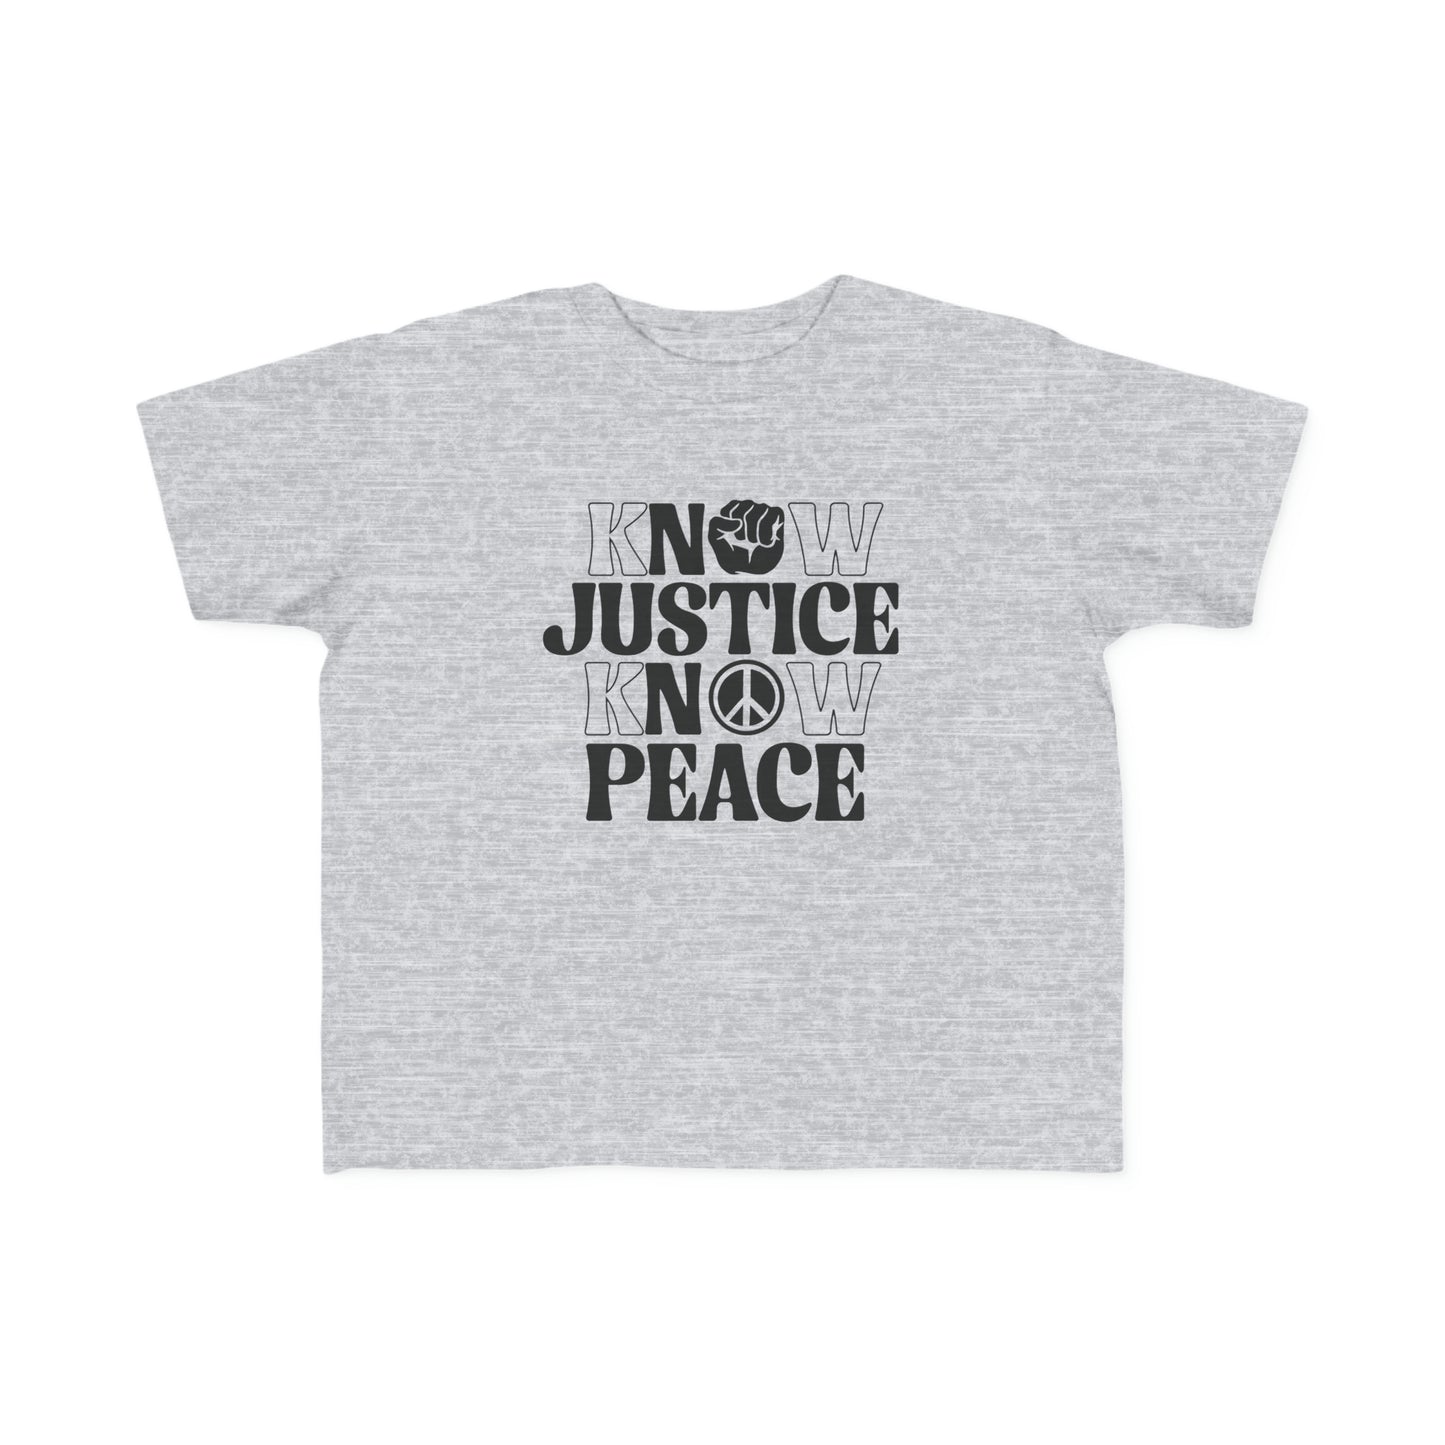 “Know Justice, Know Peace (Classic)” Toddler's Tee